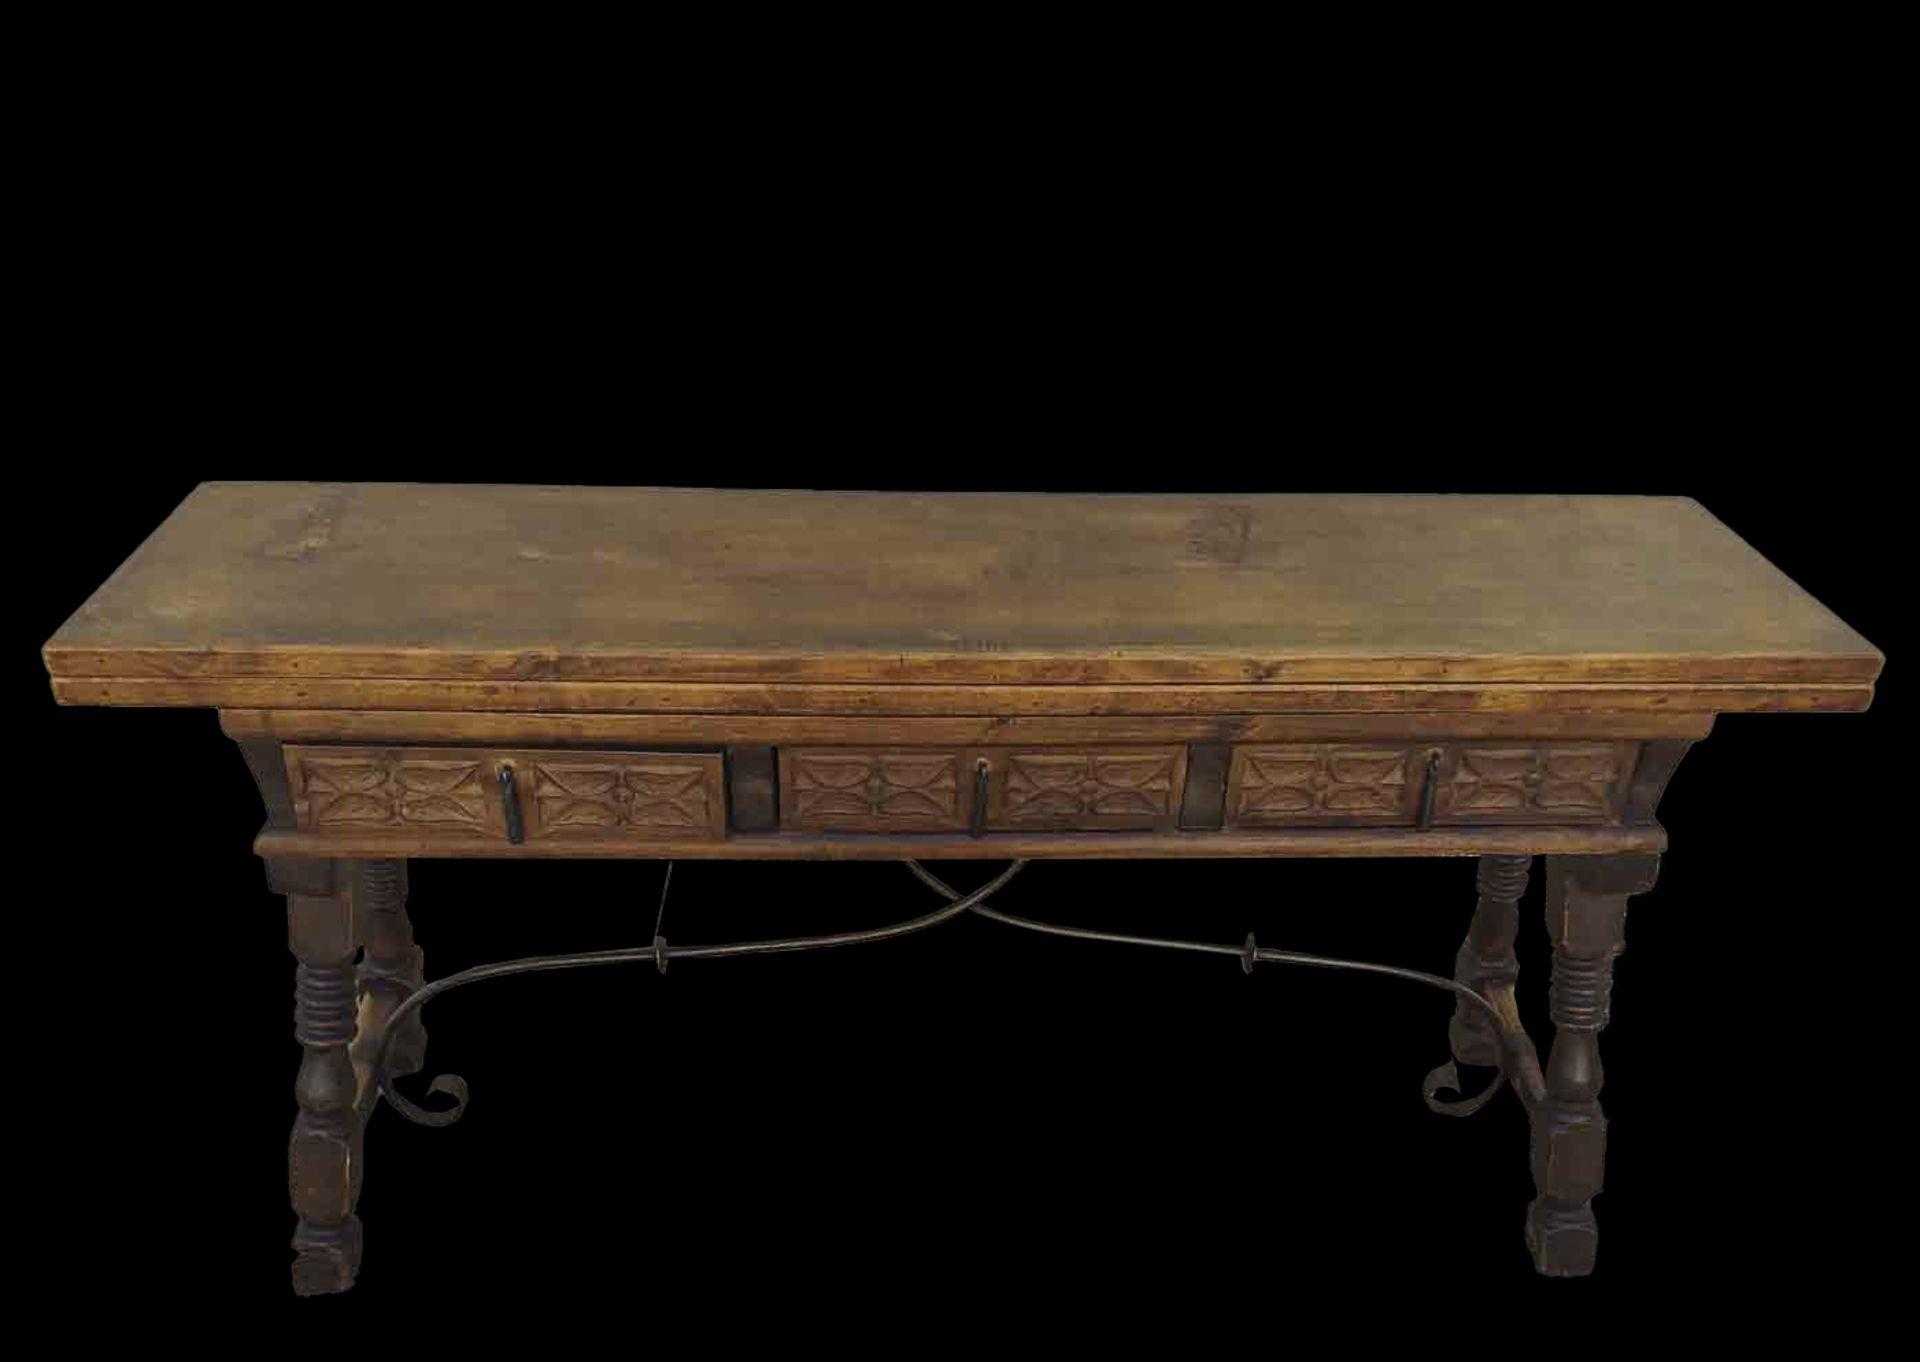 Large Castilian table in oak and lyre leg type forging from the 18th century